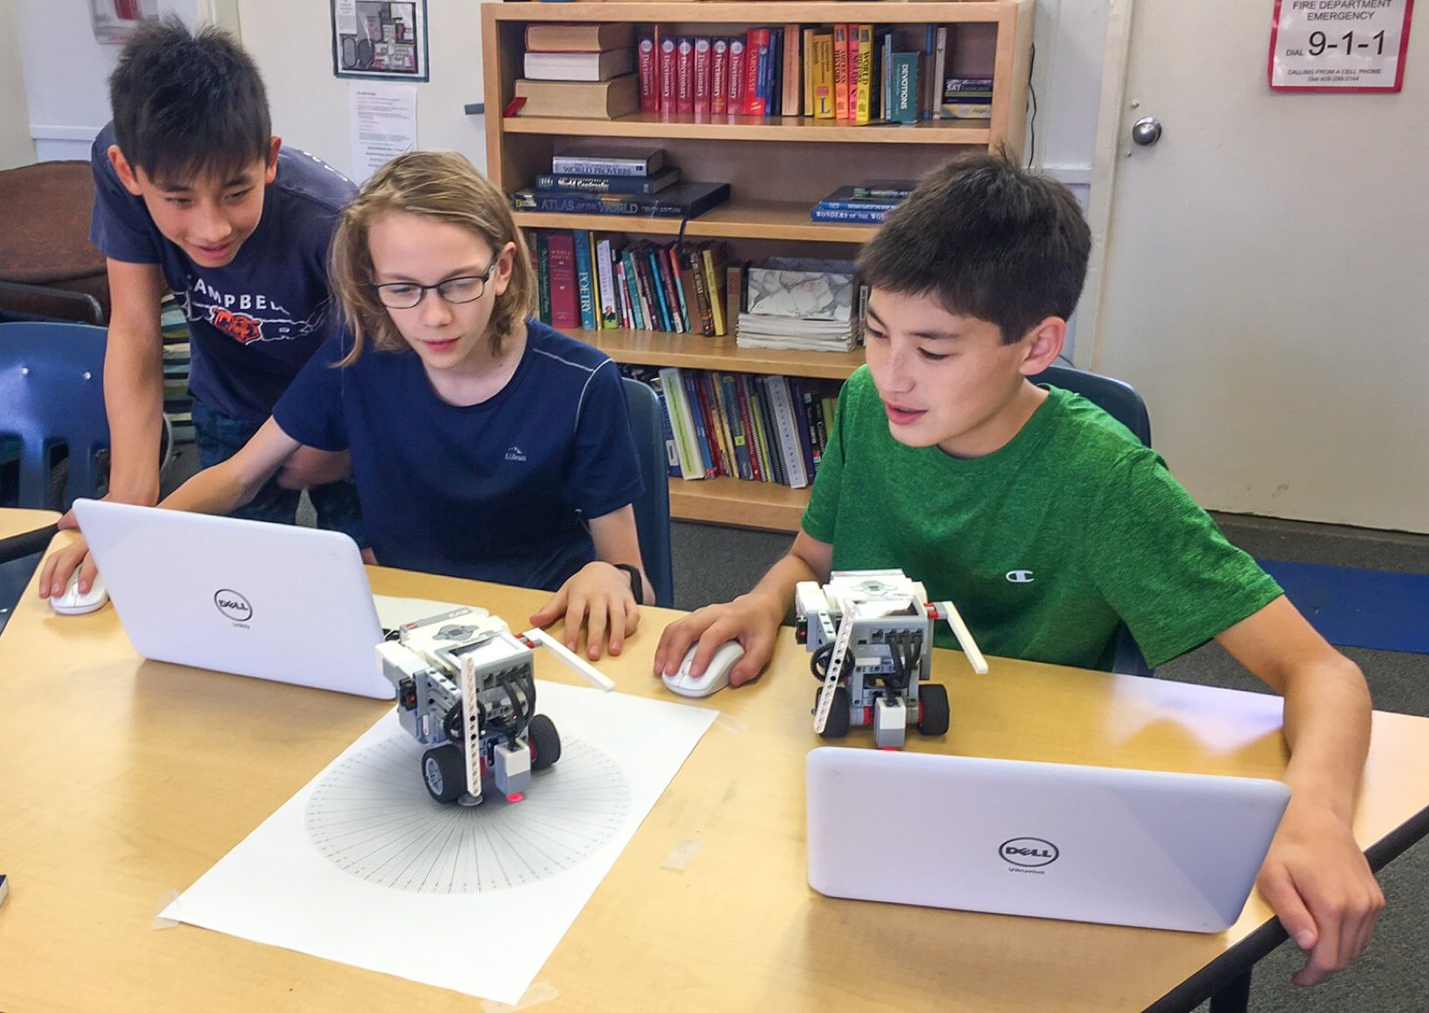 Middle school students working on a robotics project